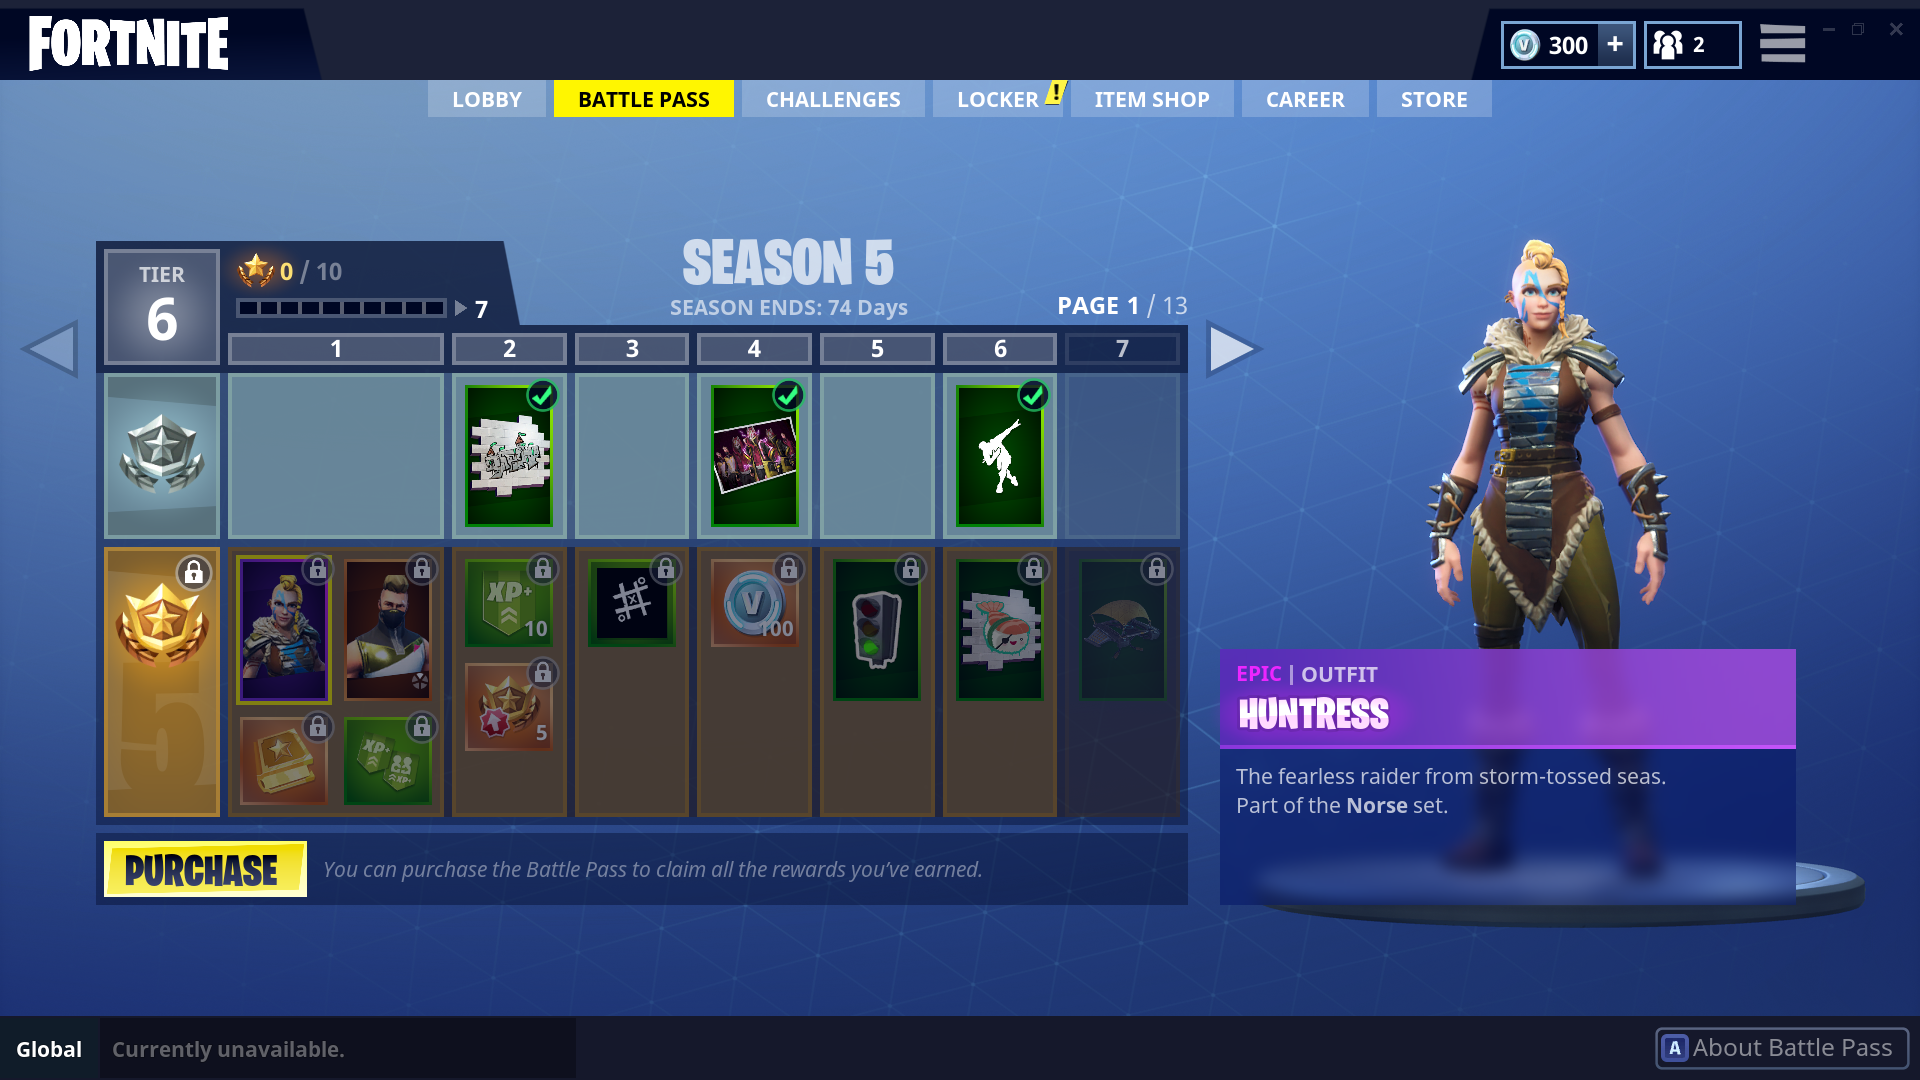 the fearless raider from storm tossed seas the huntress is part of the norse set and is unlocked at tier 1 upon purchasing the season 5 battle pass - fortnite season 8 battle pass tier 100